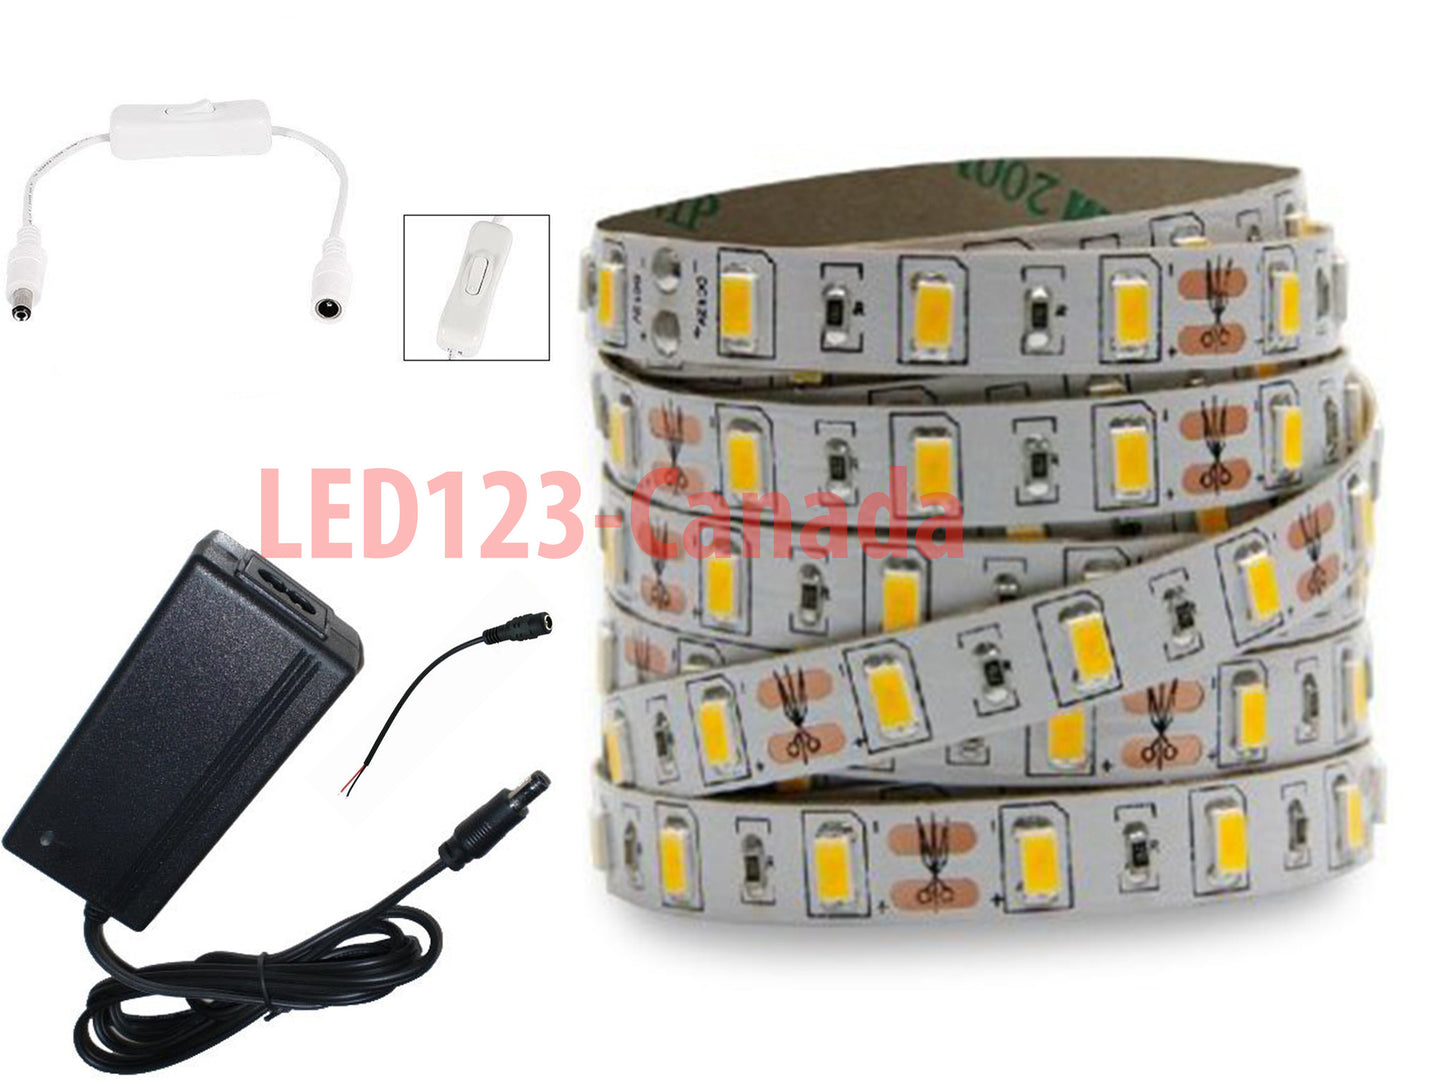 16.4ft/5M 5630 300LEDs FLEXIBLE STRIP LIGHT COMPLETE KIT/ HIGHT QUALITY WITH cUL APPROVED POWER SUPPLY WITH A SWITCH